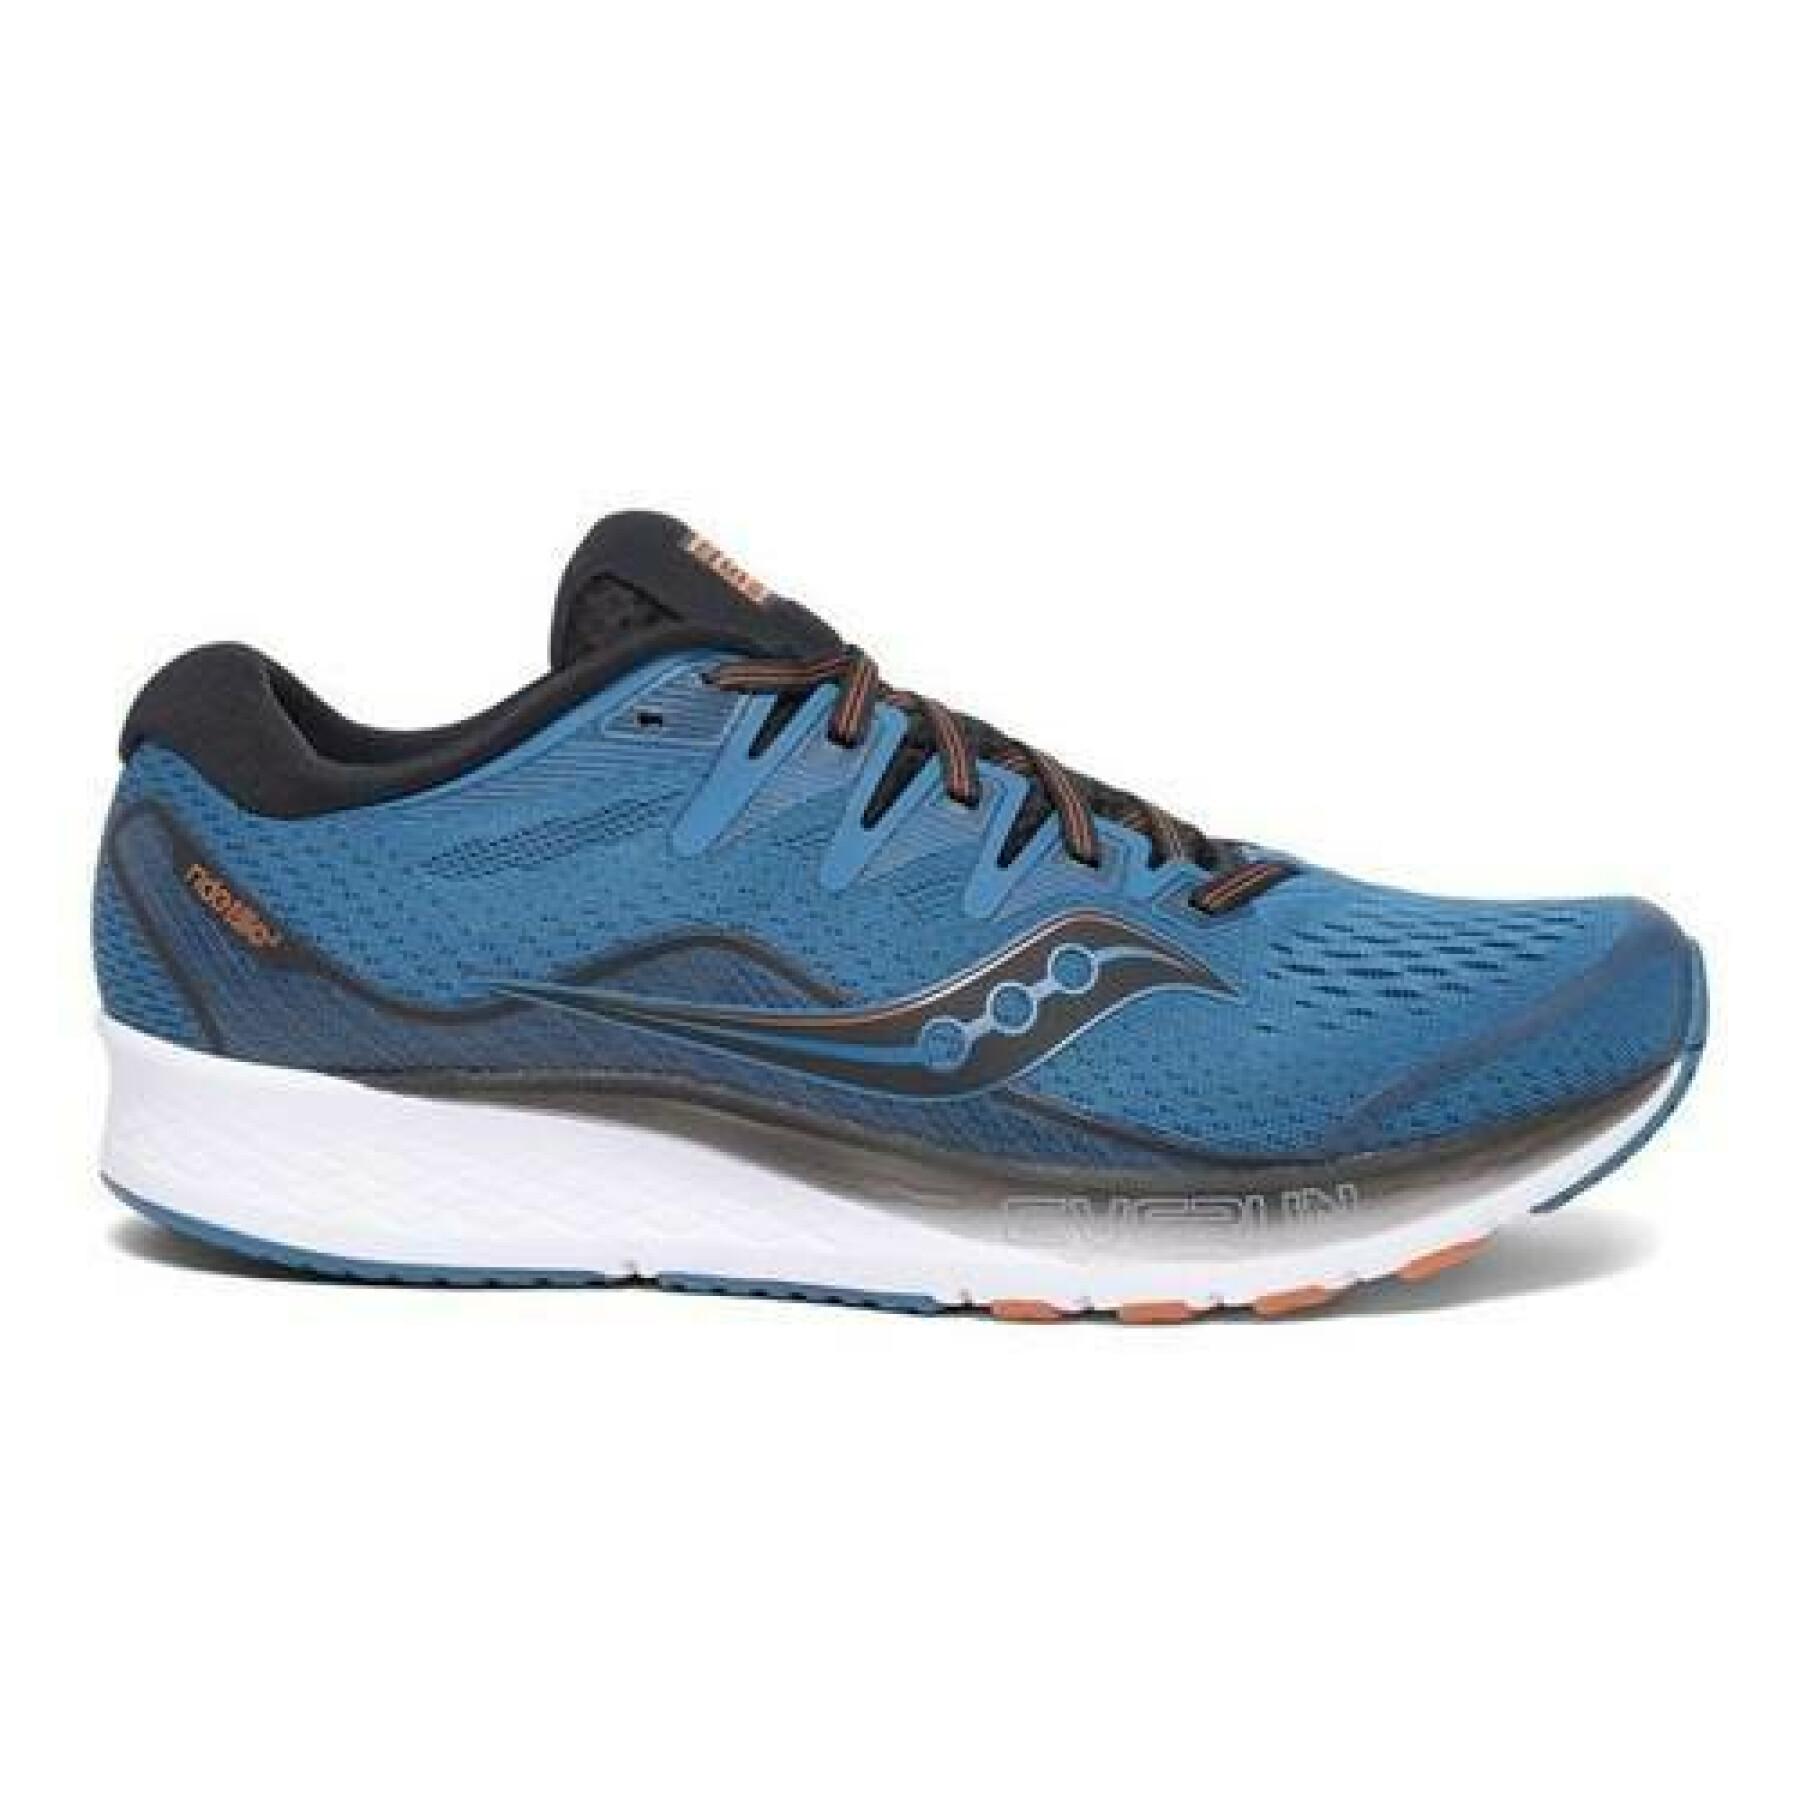 Shoes Saucony ride iso 2